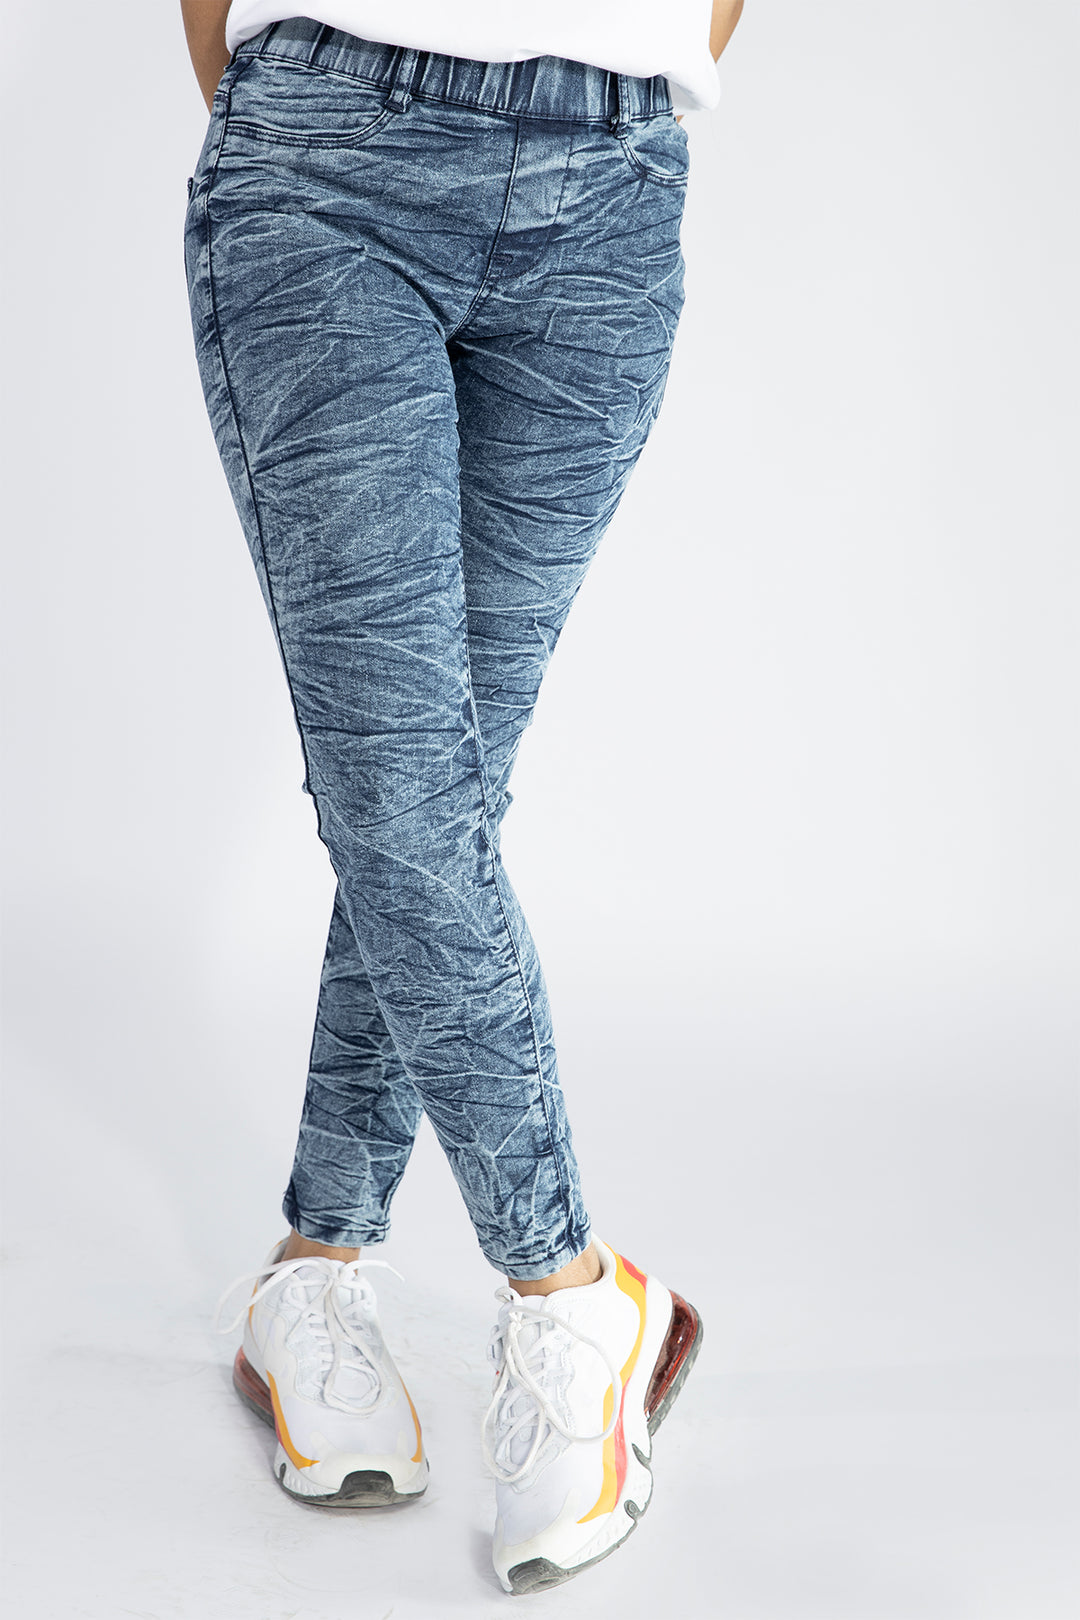 Mid Wash Stretchy Jeggings - W21 - WDJ0007 - Sclothers